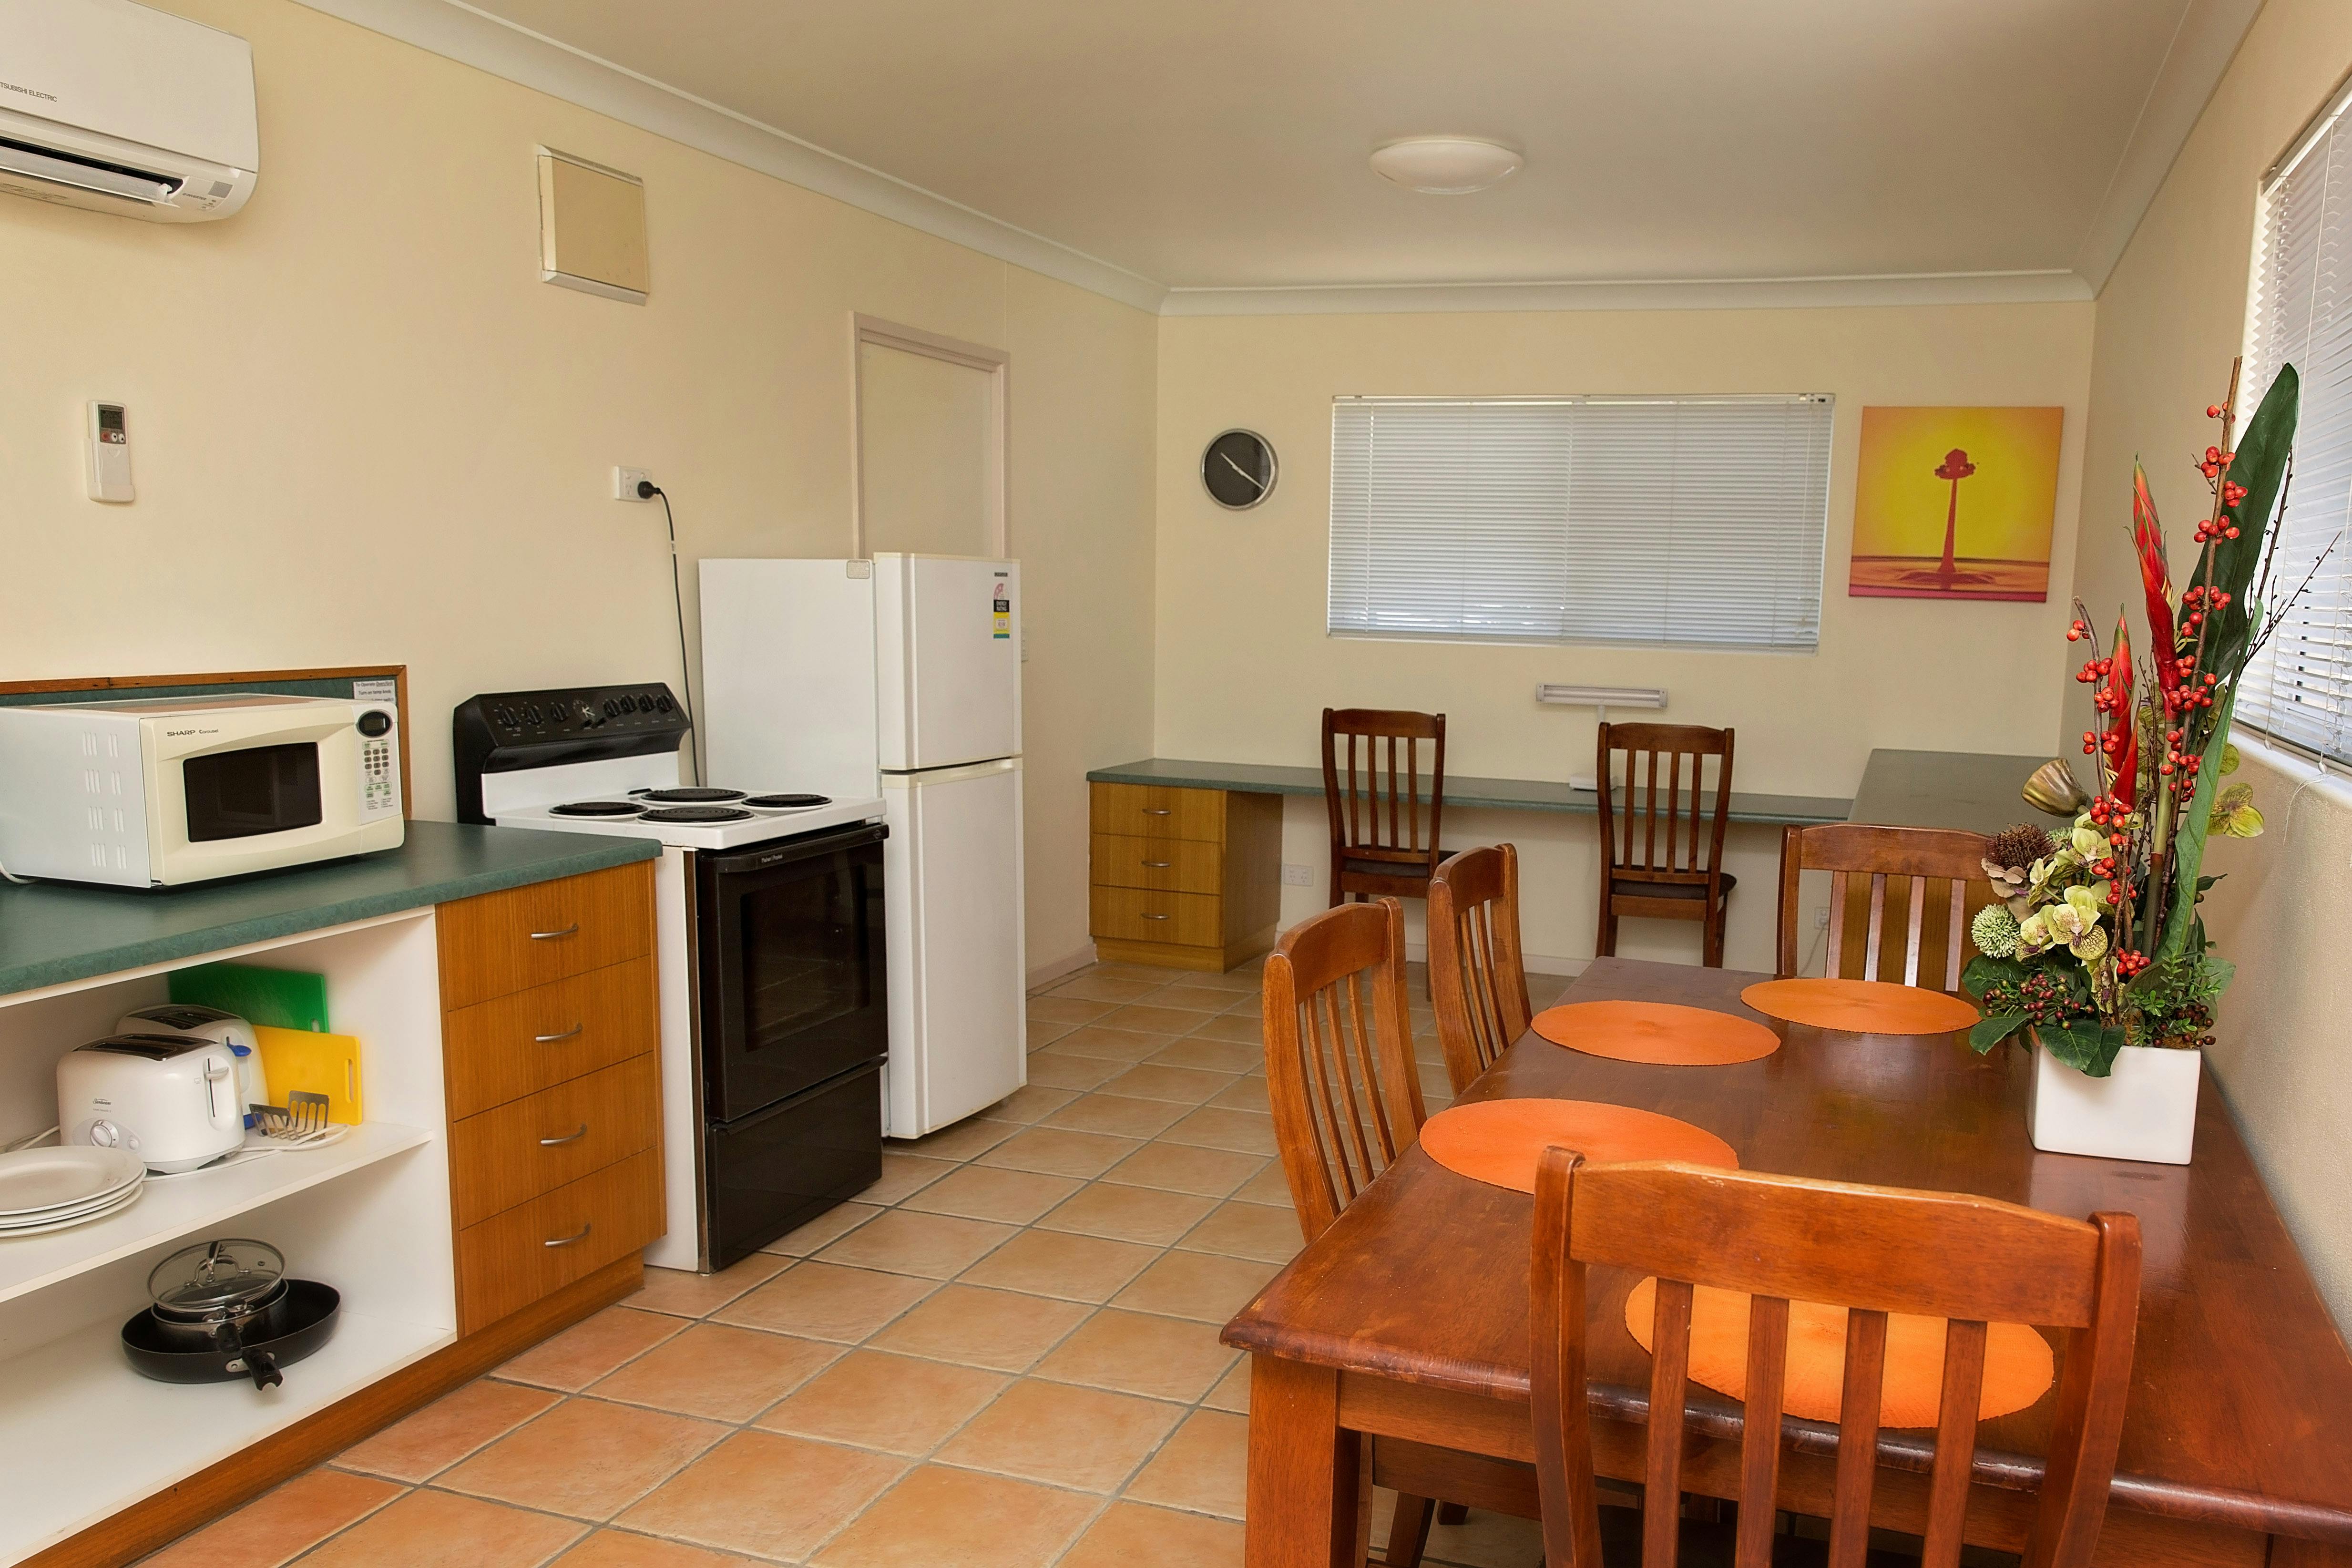 Kitchen Family Room with Kitchen White Lace Motor Inn Mackay, Self-Contained Rooms